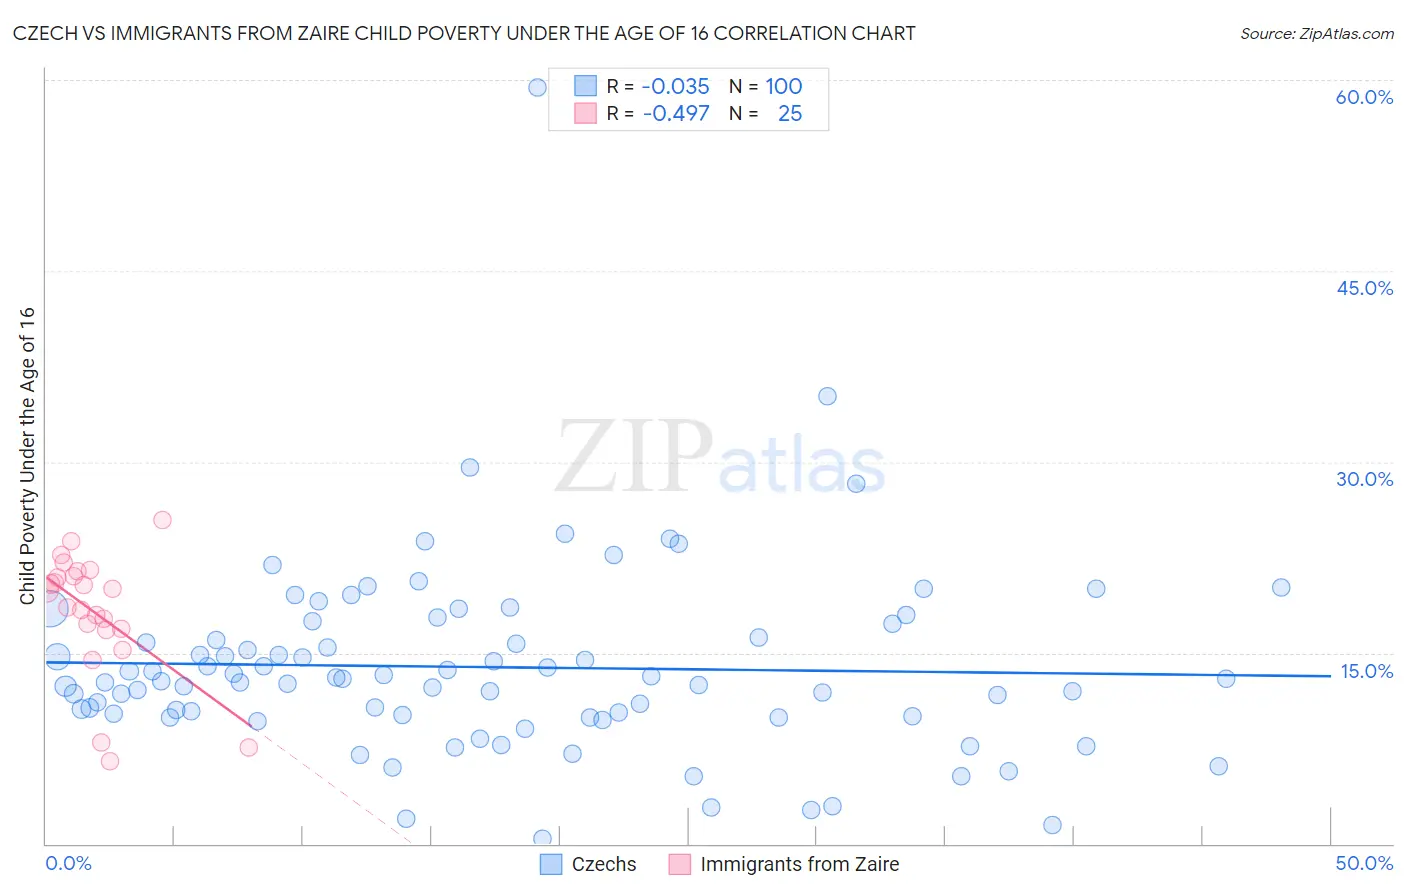 Czech vs Immigrants from Zaire Child Poverty Under the Age of 16